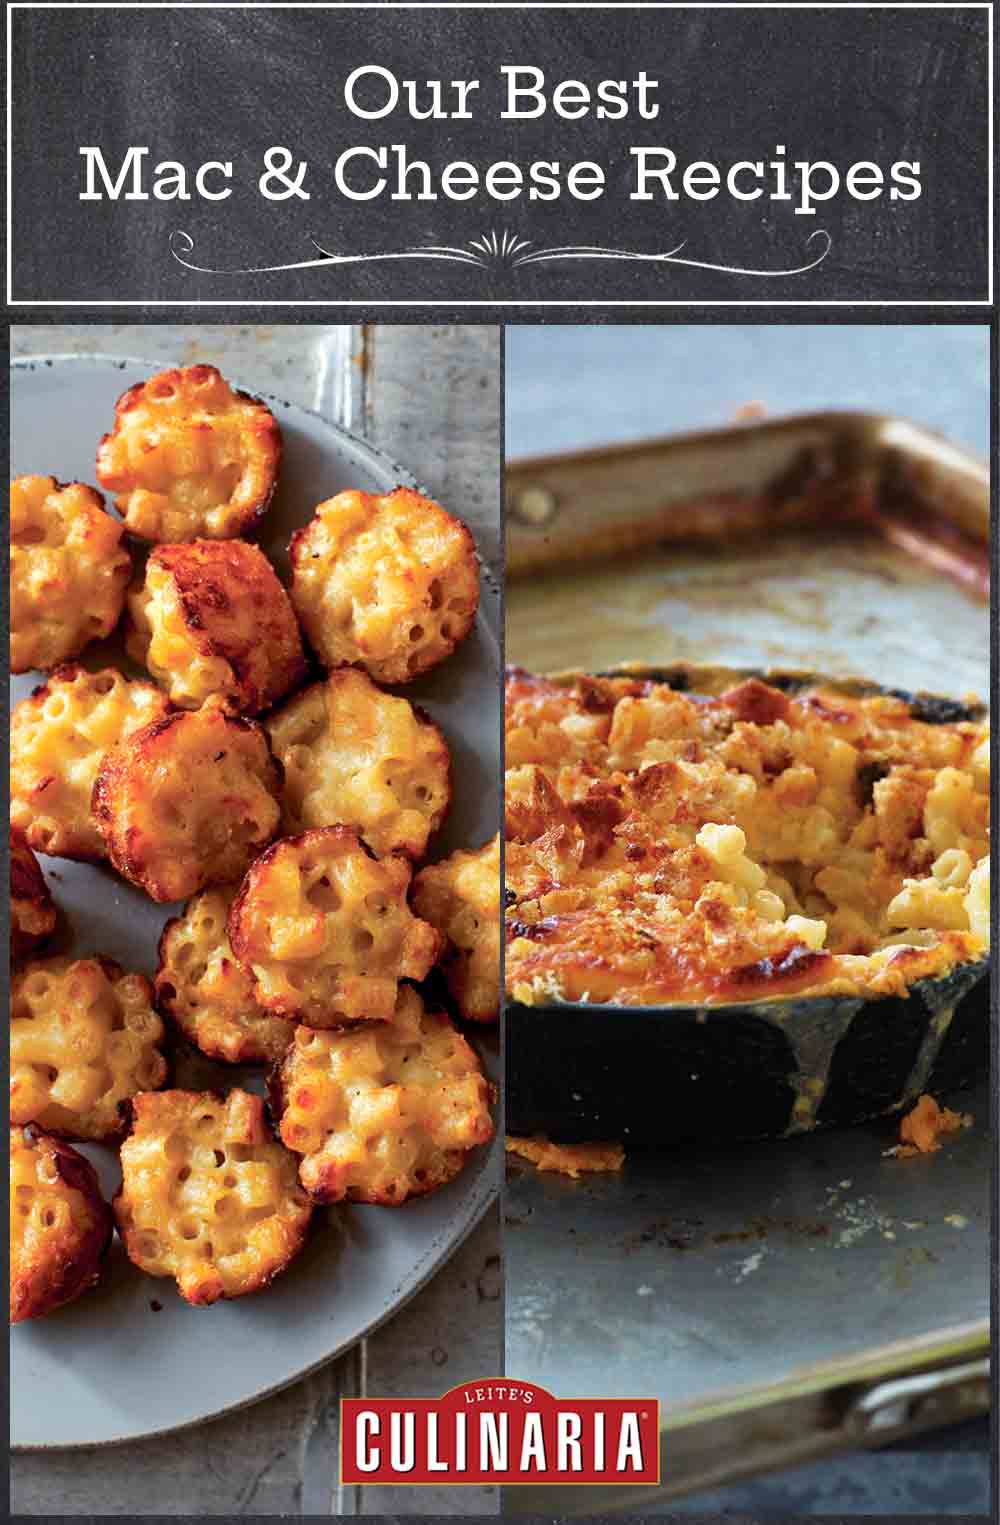 Images of 2 mac and cheese recipes -- mac and cheese canapes, baked macaroni and cheese.